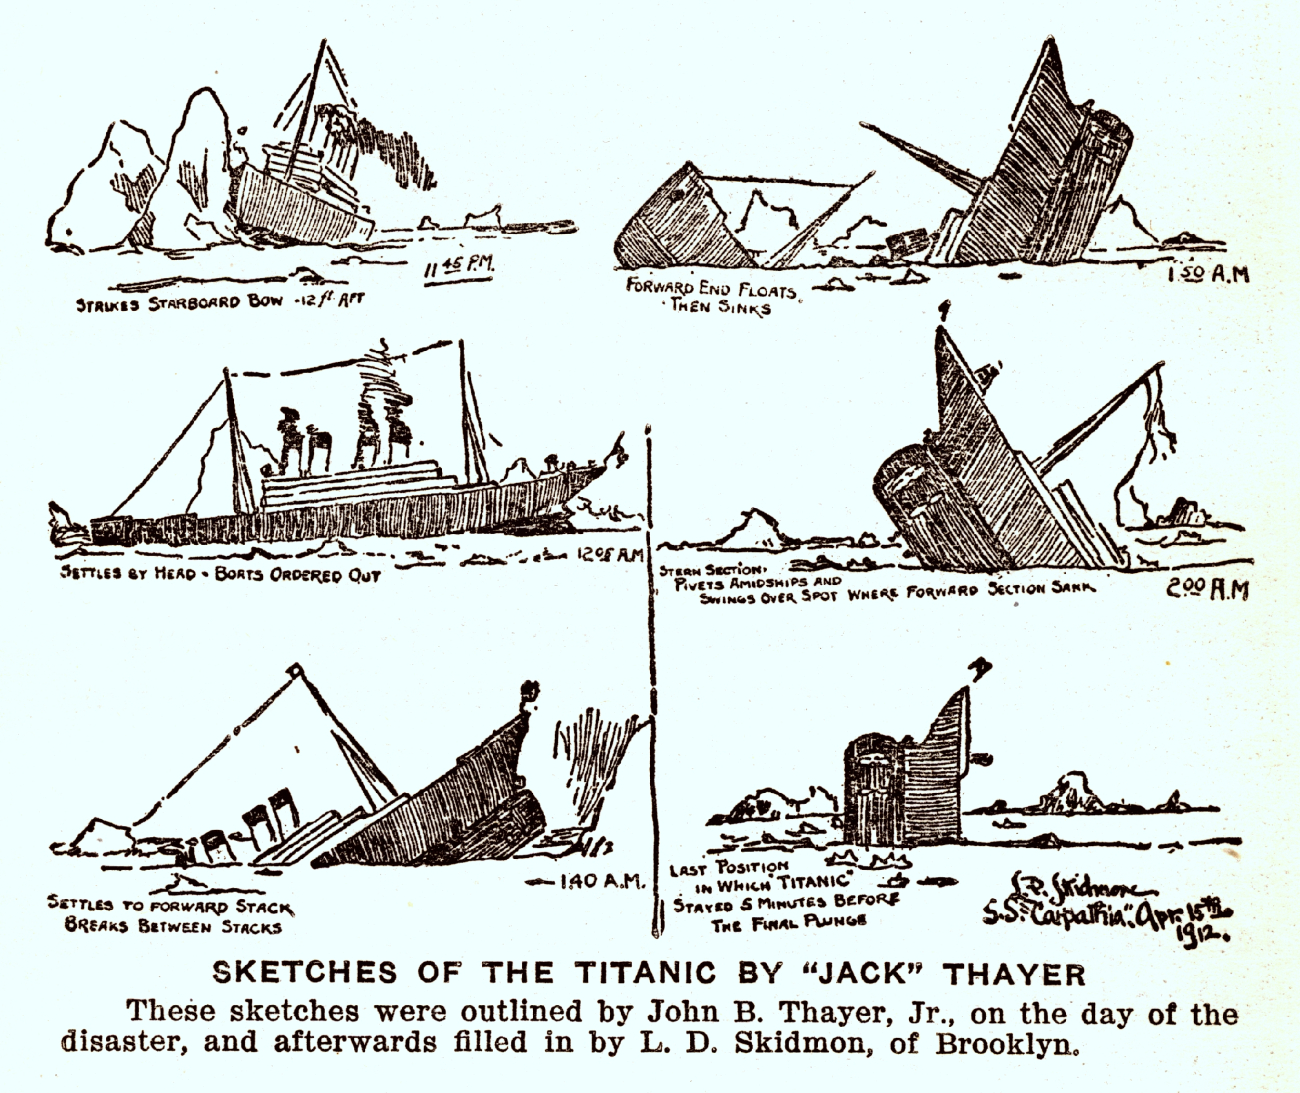 An eyewitness impression of the sinking of the TITANIC by Jack Thayer